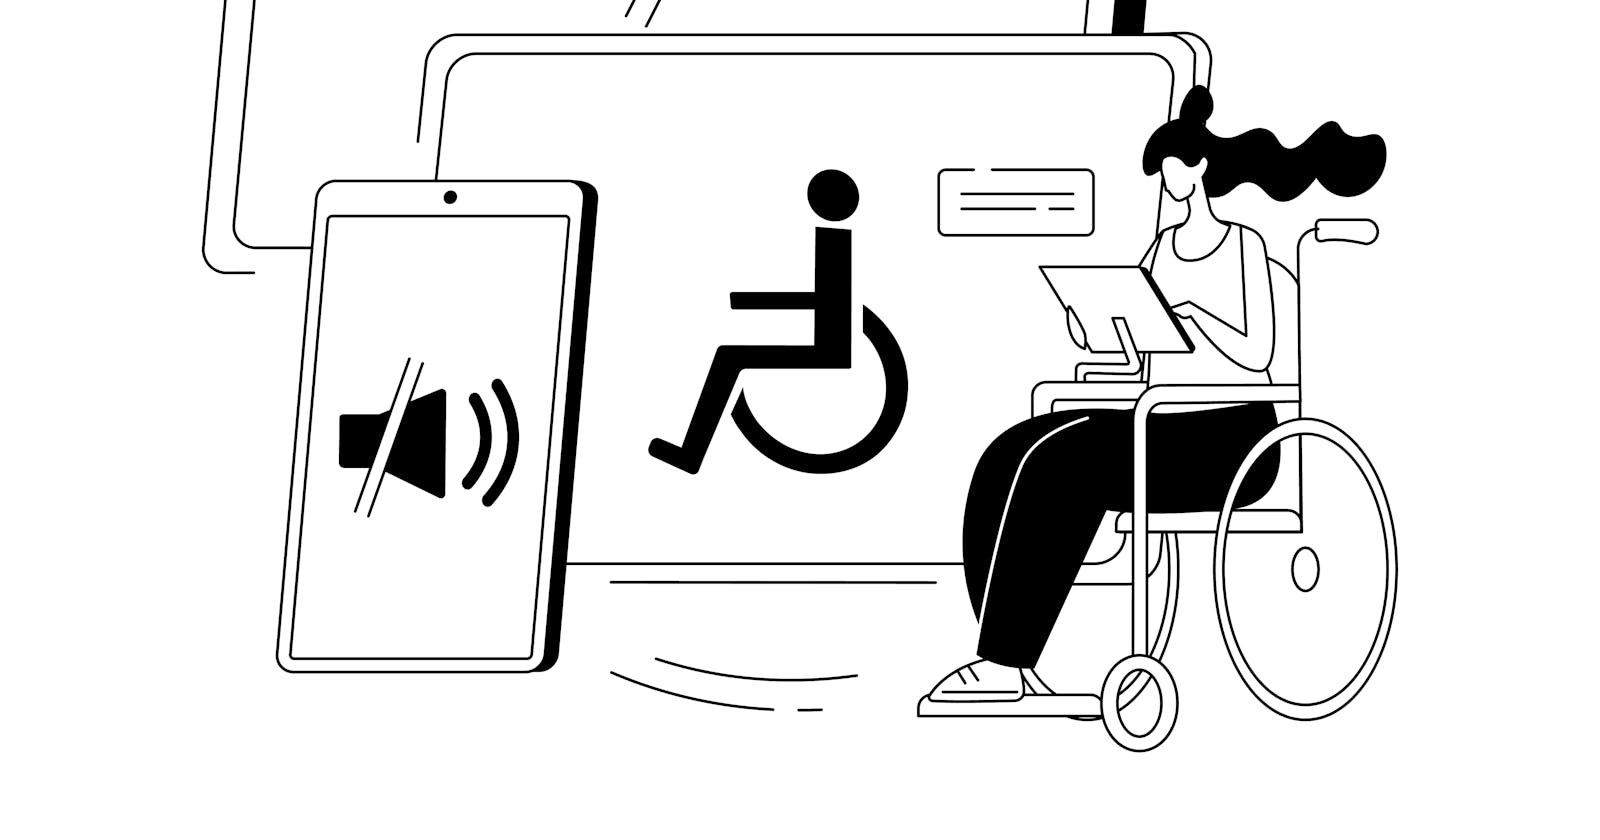 Enhancing Inclusiveness: Essential for Better Web Accessibility